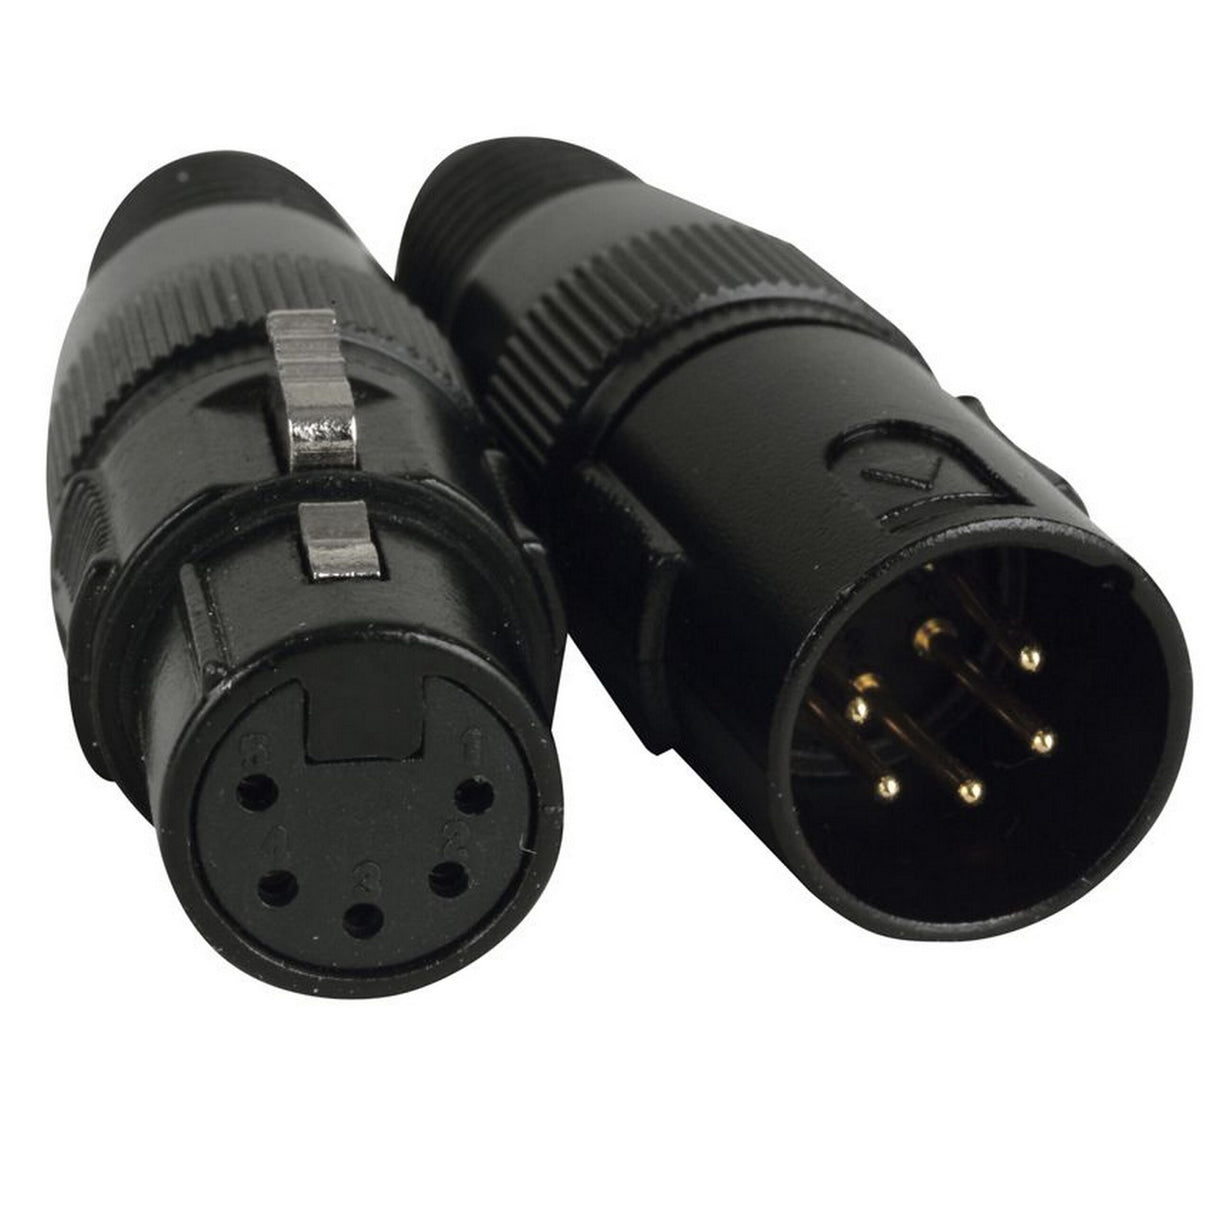 Accu Cable ACXLR5PSET 5-Pin, 1 Male and 1 Female XLR Connectors with Gold Pins